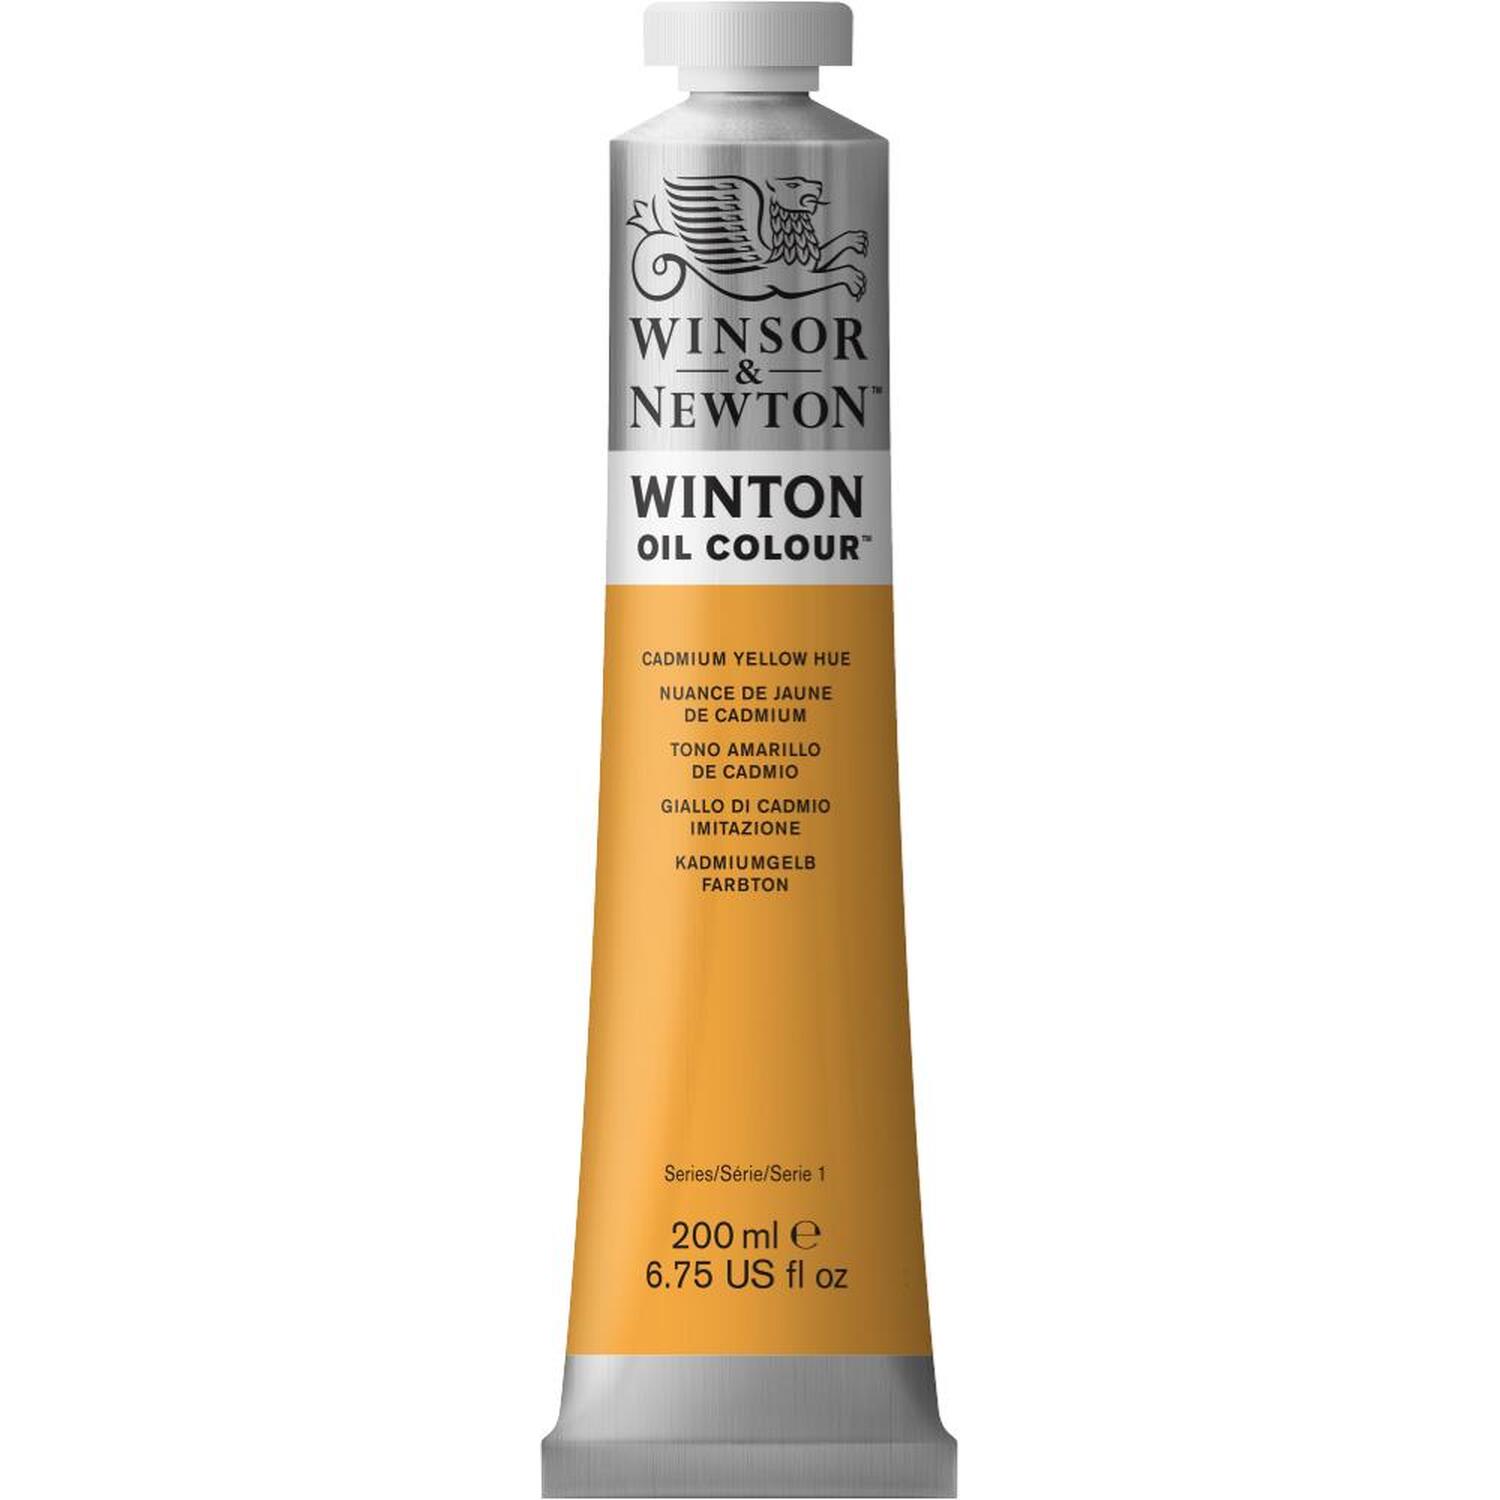 Winsor and Newton 200ml Winton Oil Colours - Cadmium Yellow Hue Image